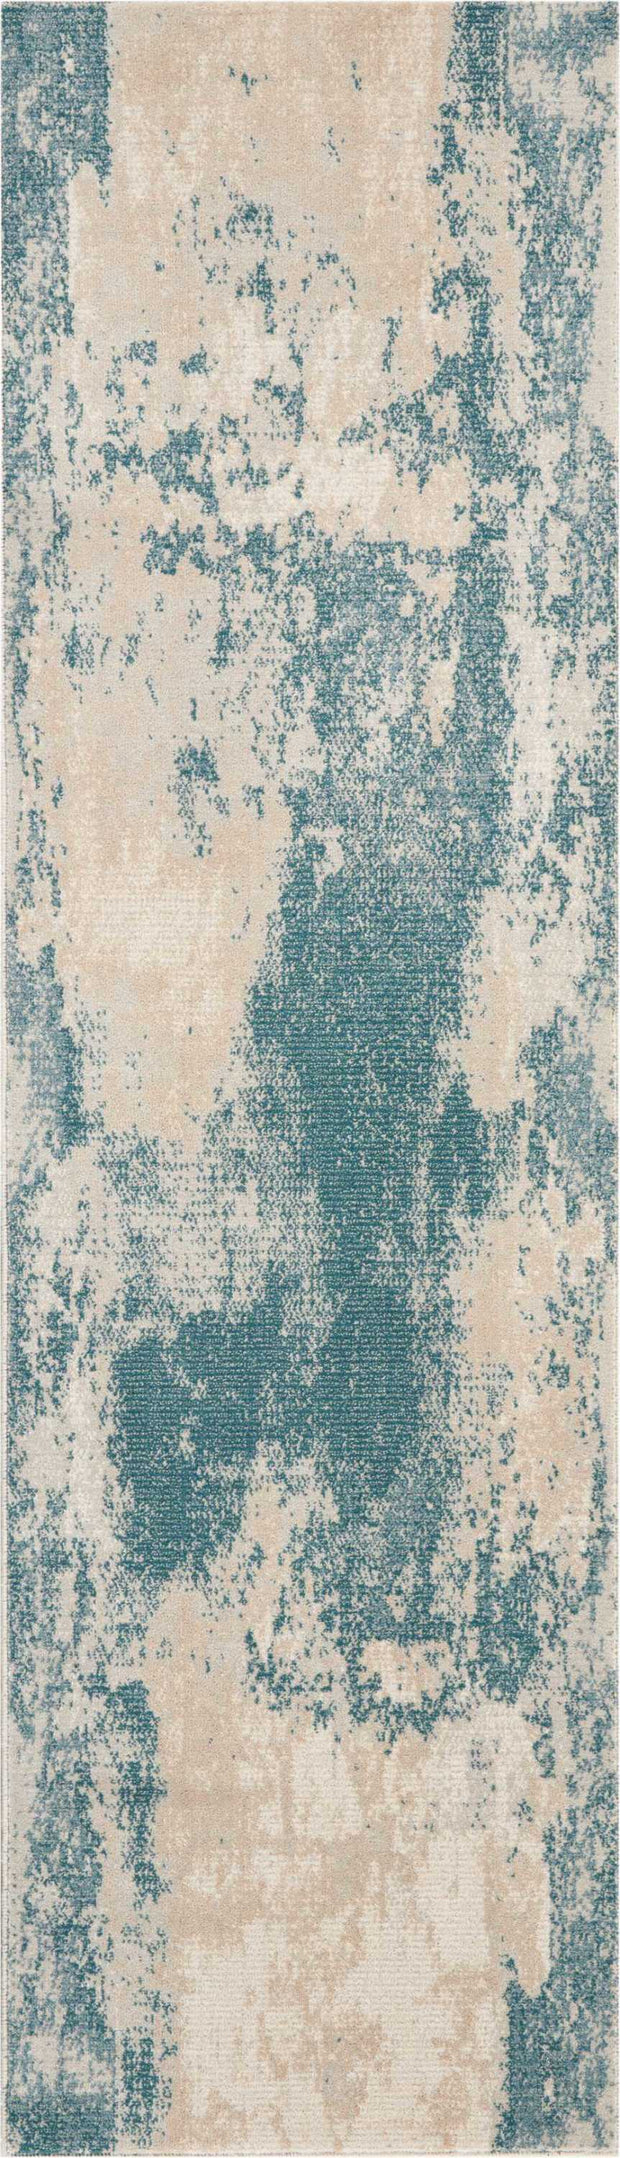 maxell ivory teal rug by nourison 99446396501 redo 2